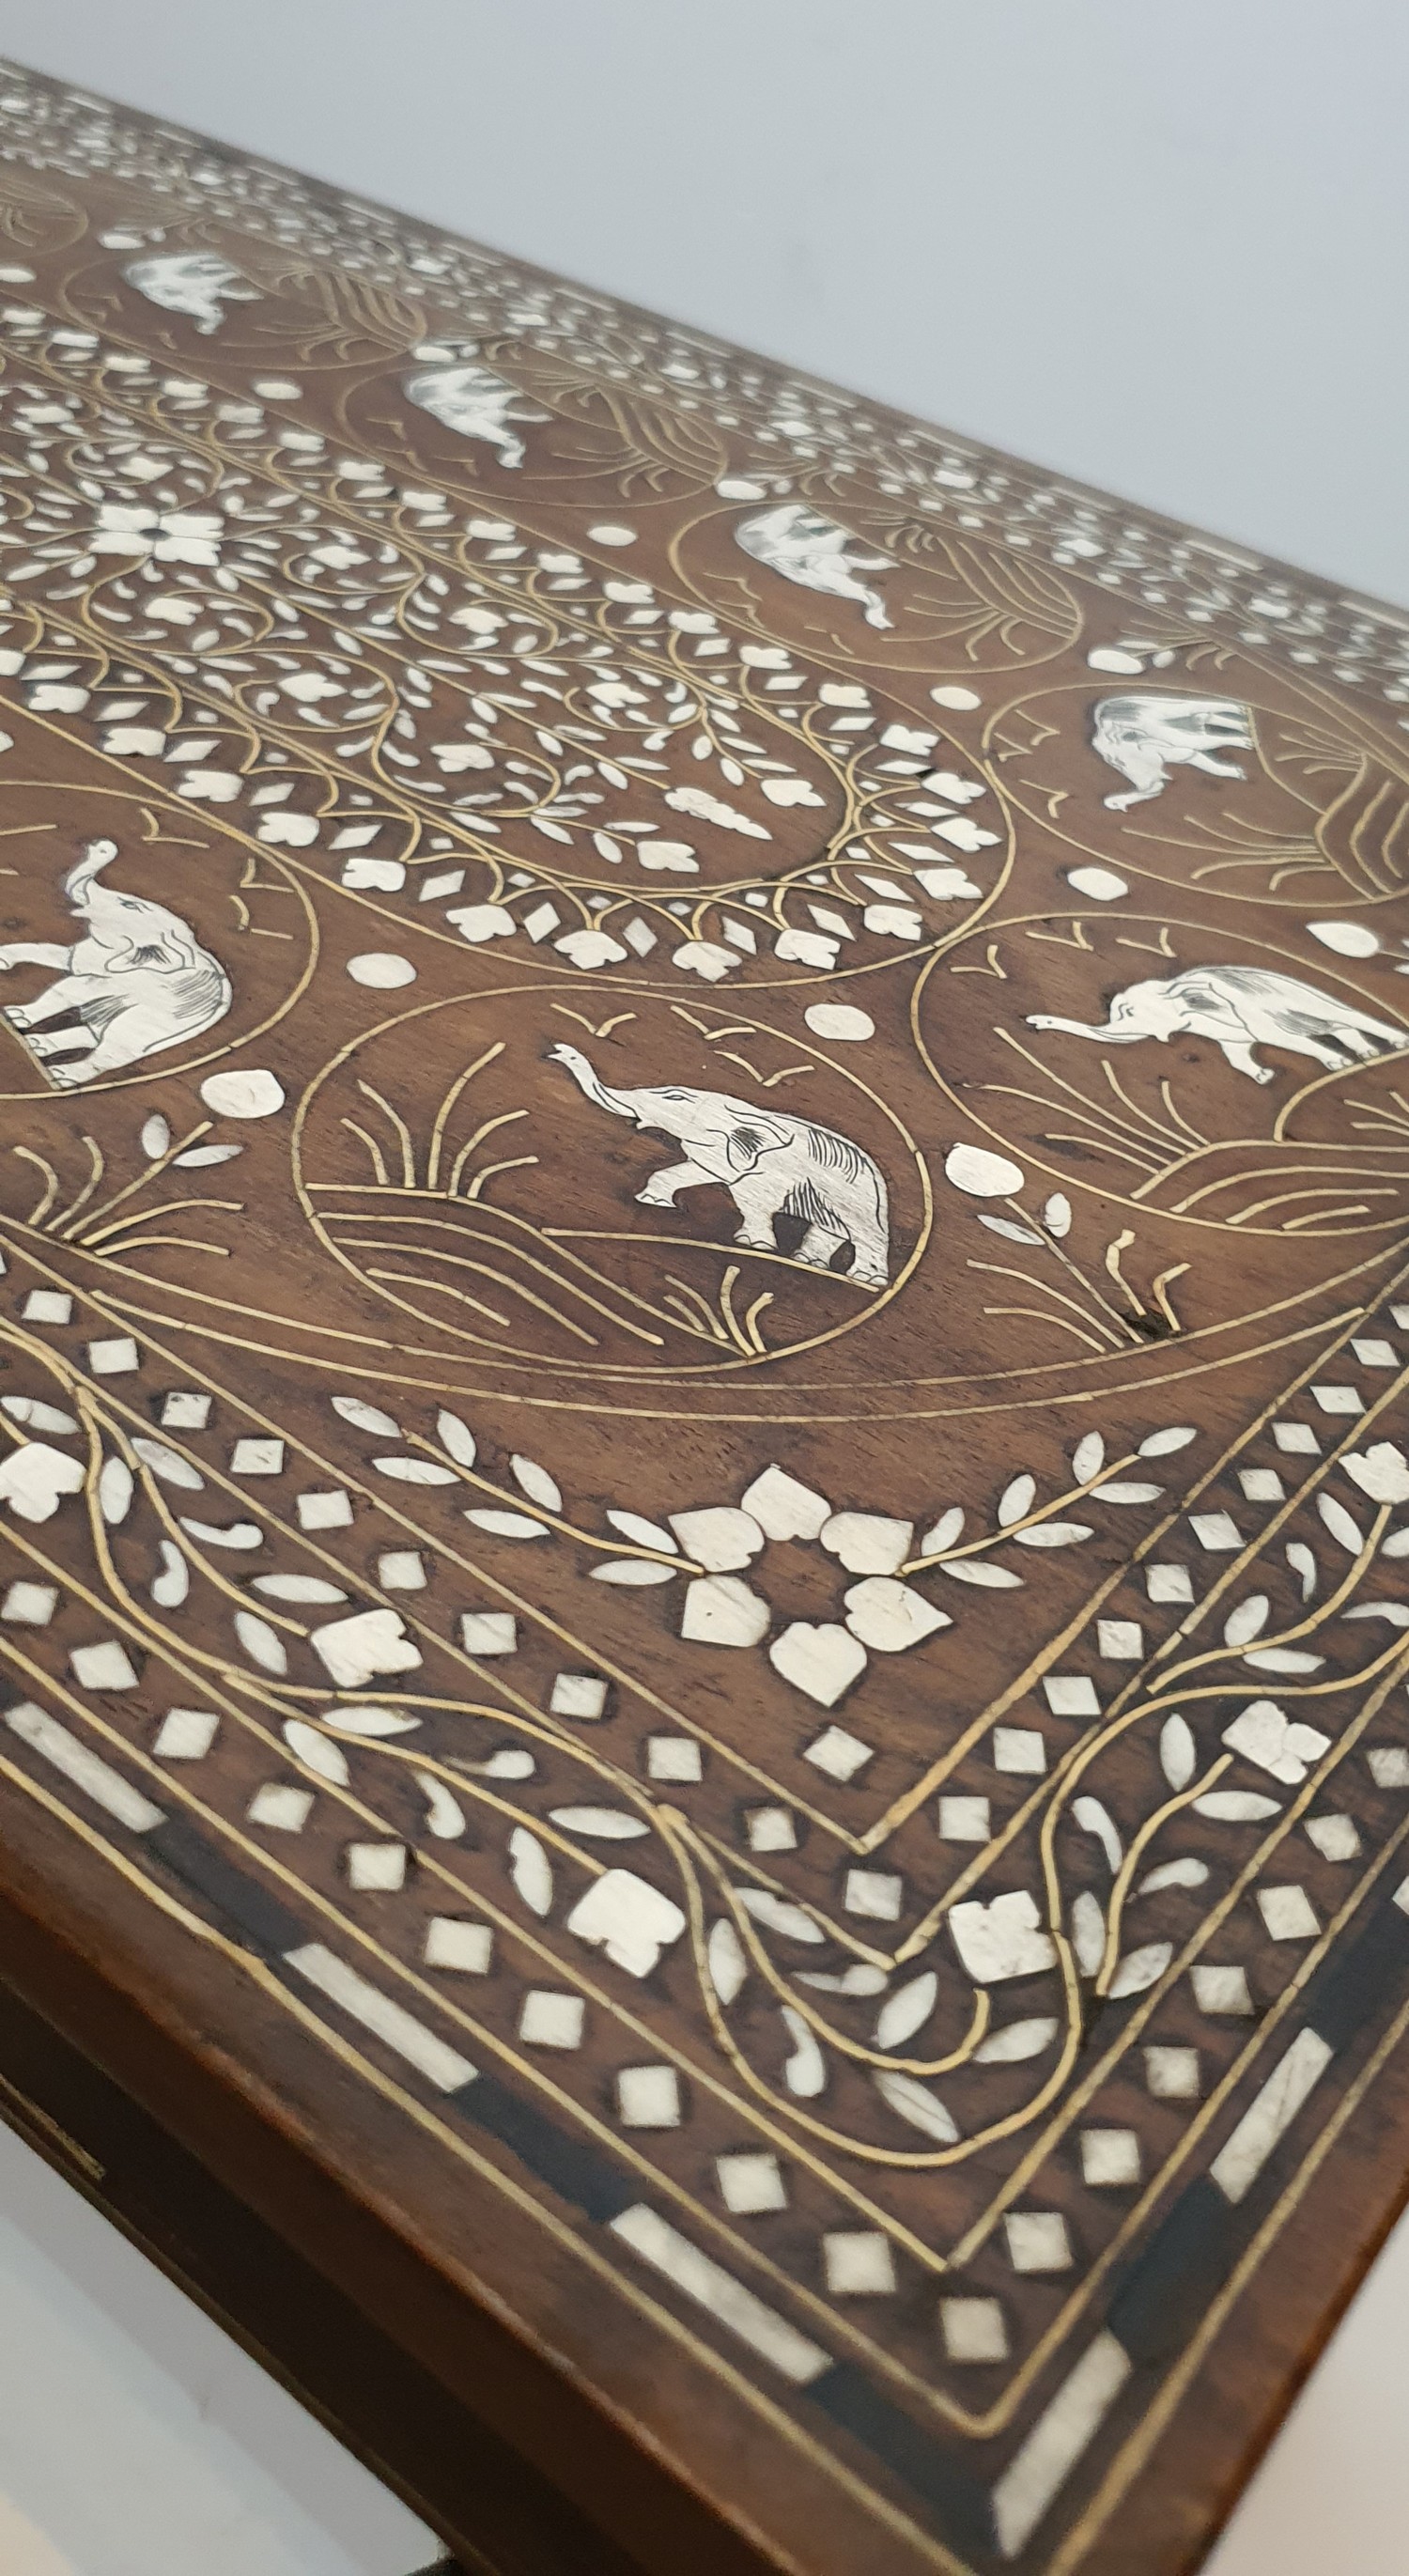 An antique Indian side table inlaid with with ivory on elephant head shape supports. The table has a - Image 4 of 5